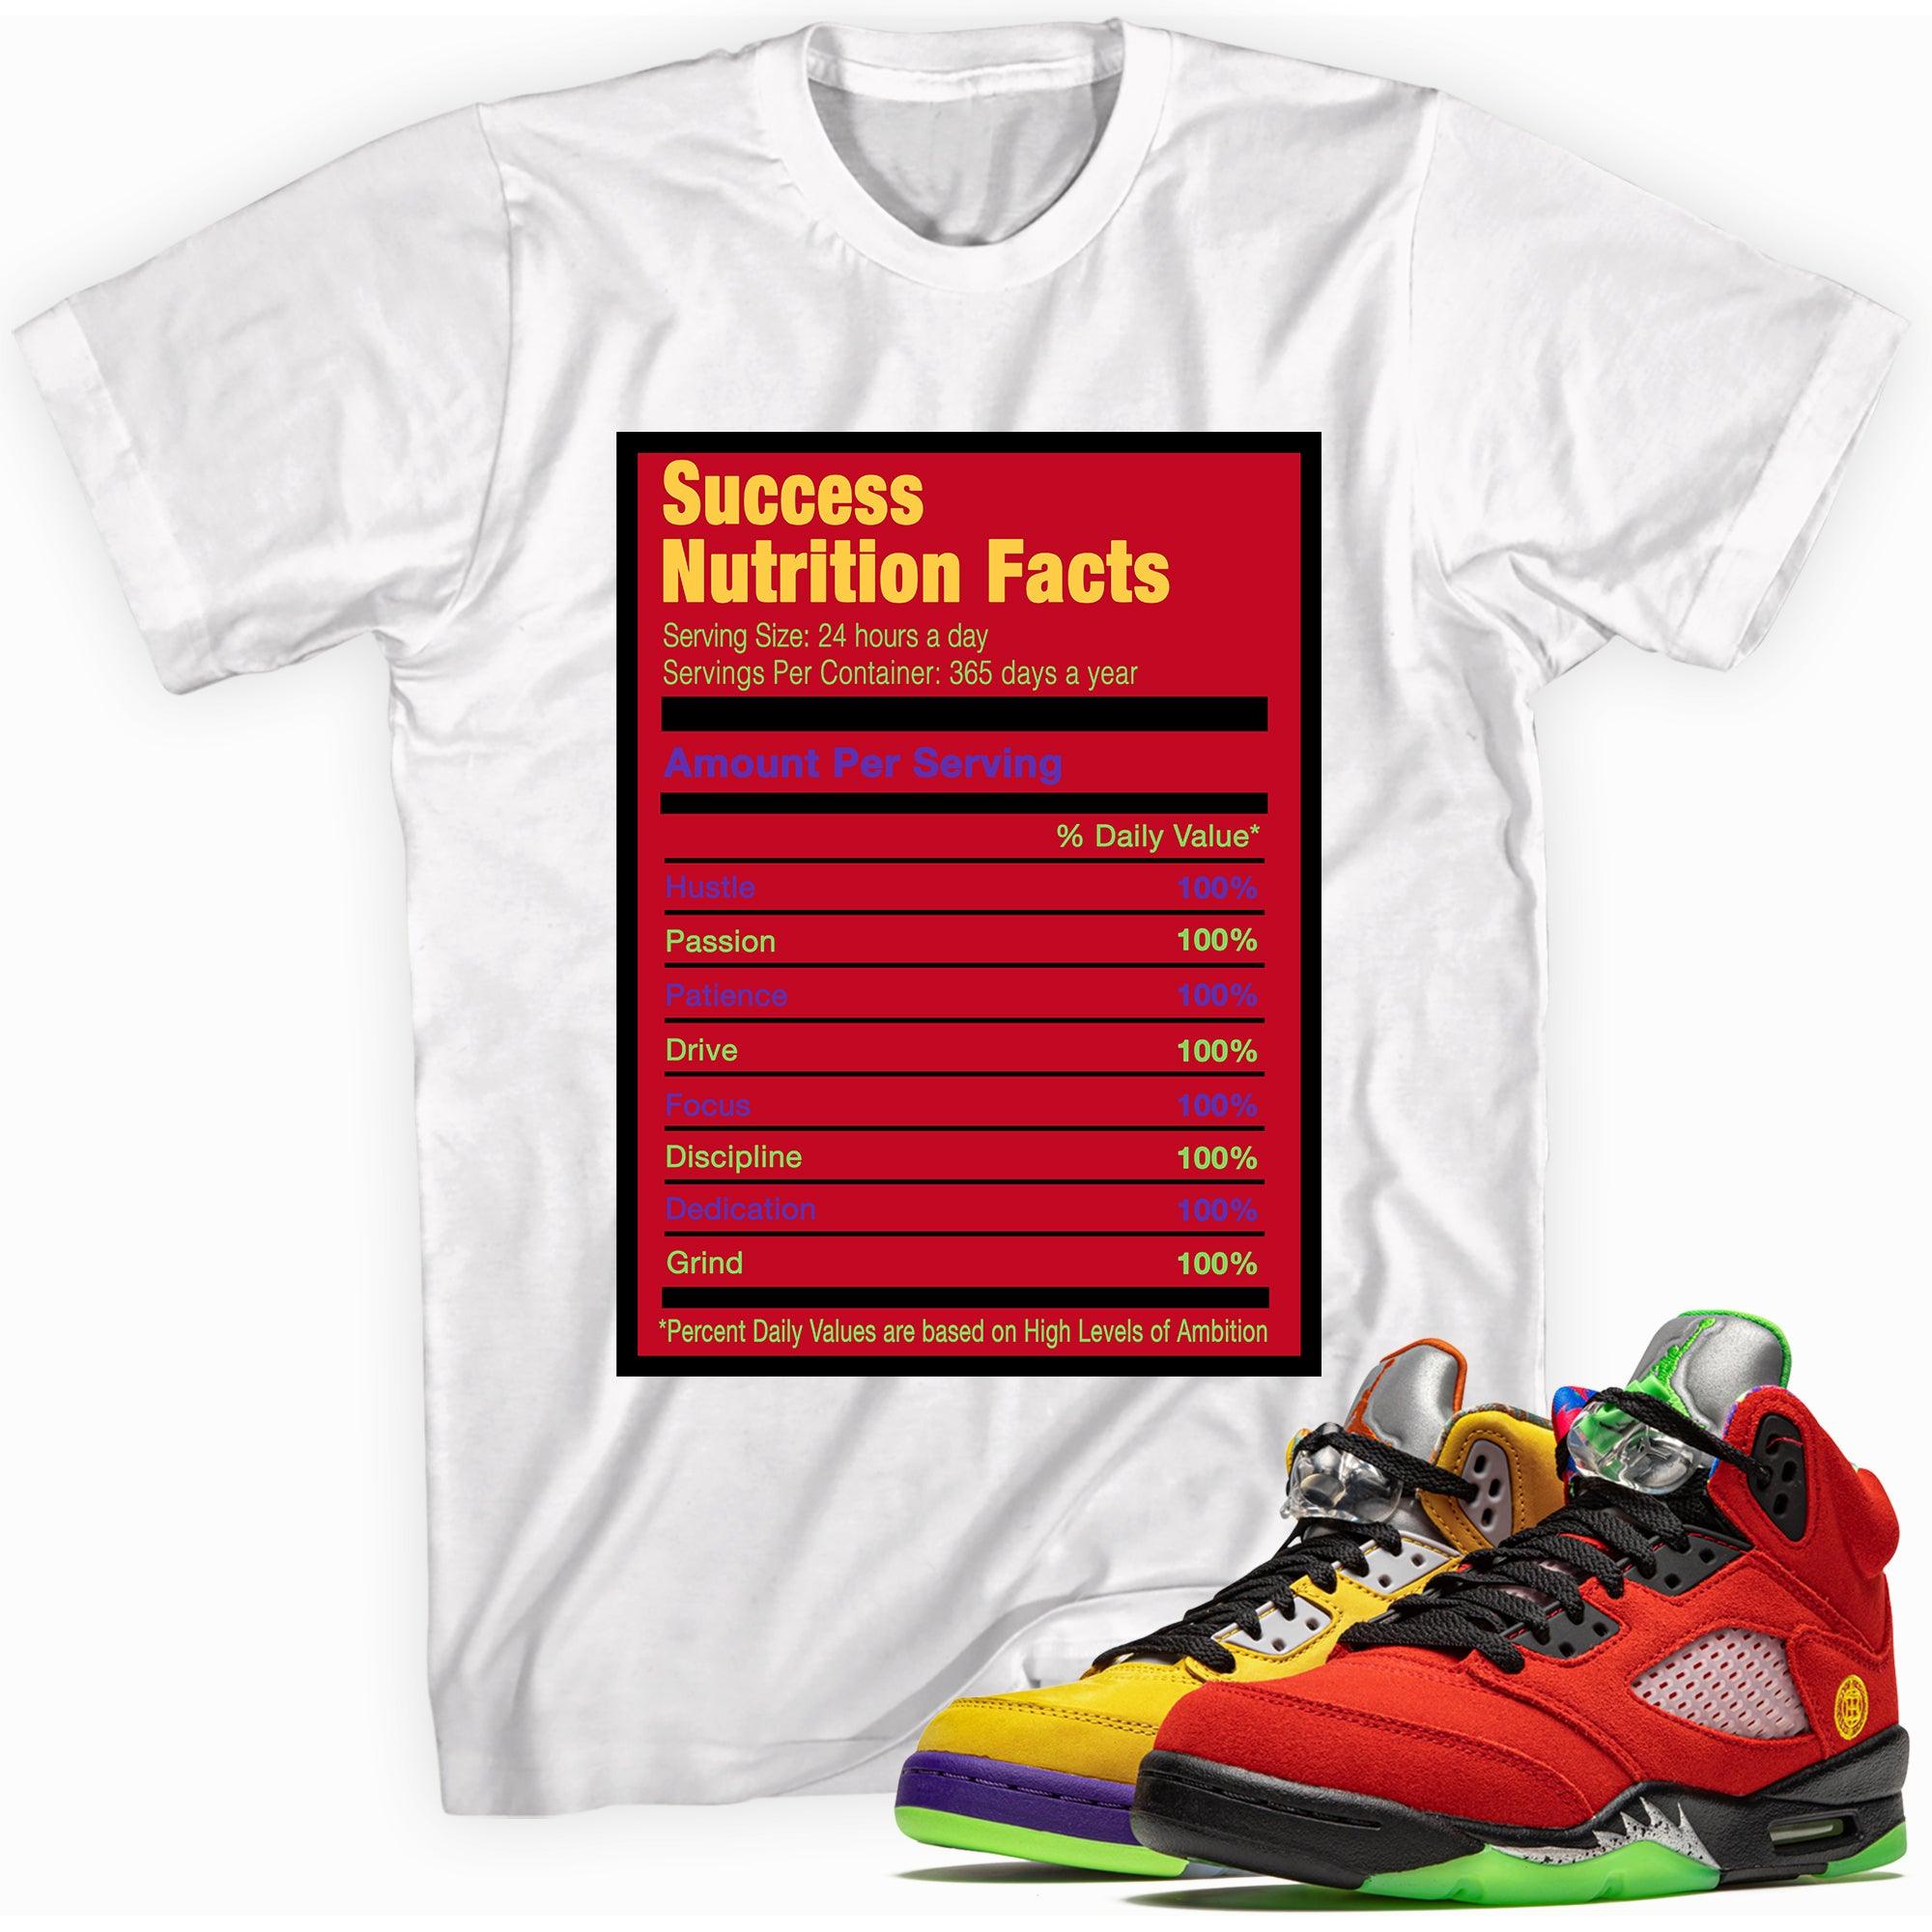 Success Nutrition Facts Sneaker Tee AJ 5 What The photo